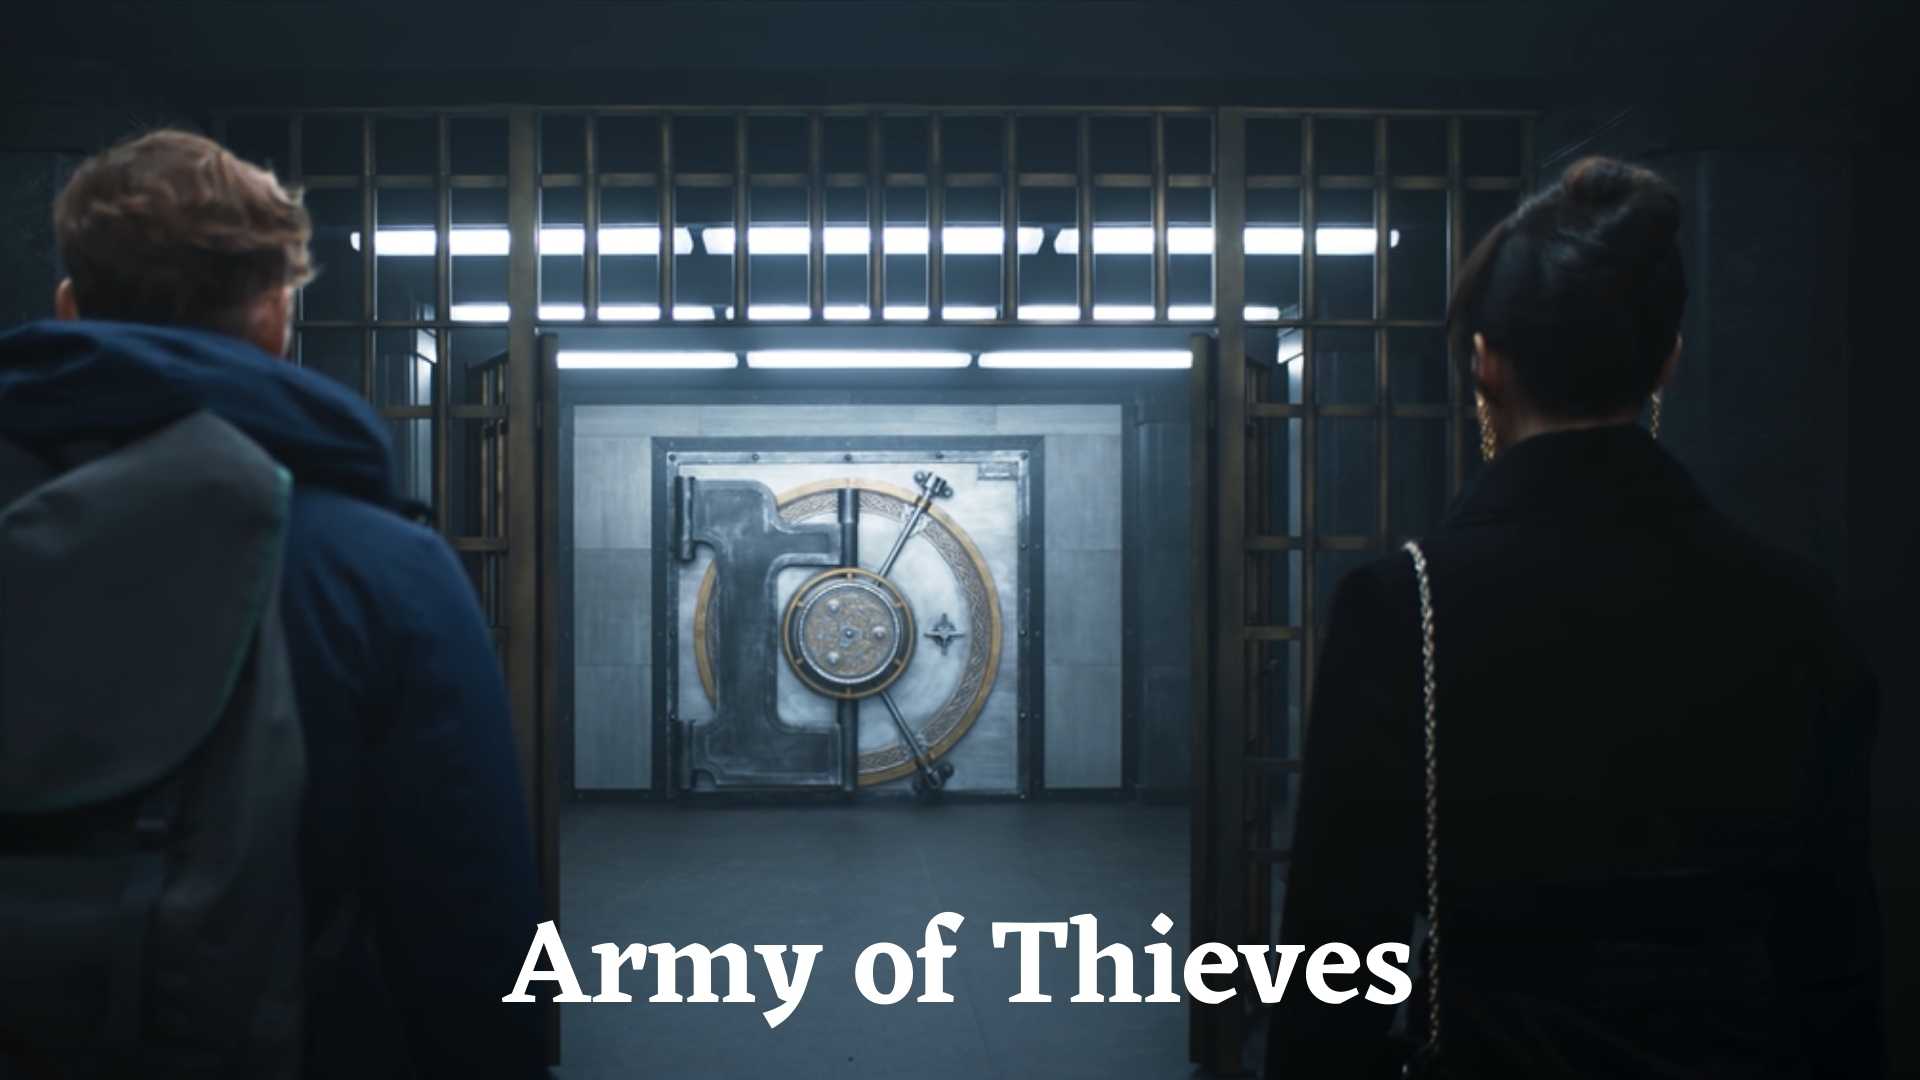 Army of Thieves Cast, Plot, Trailer, Release Date 2021